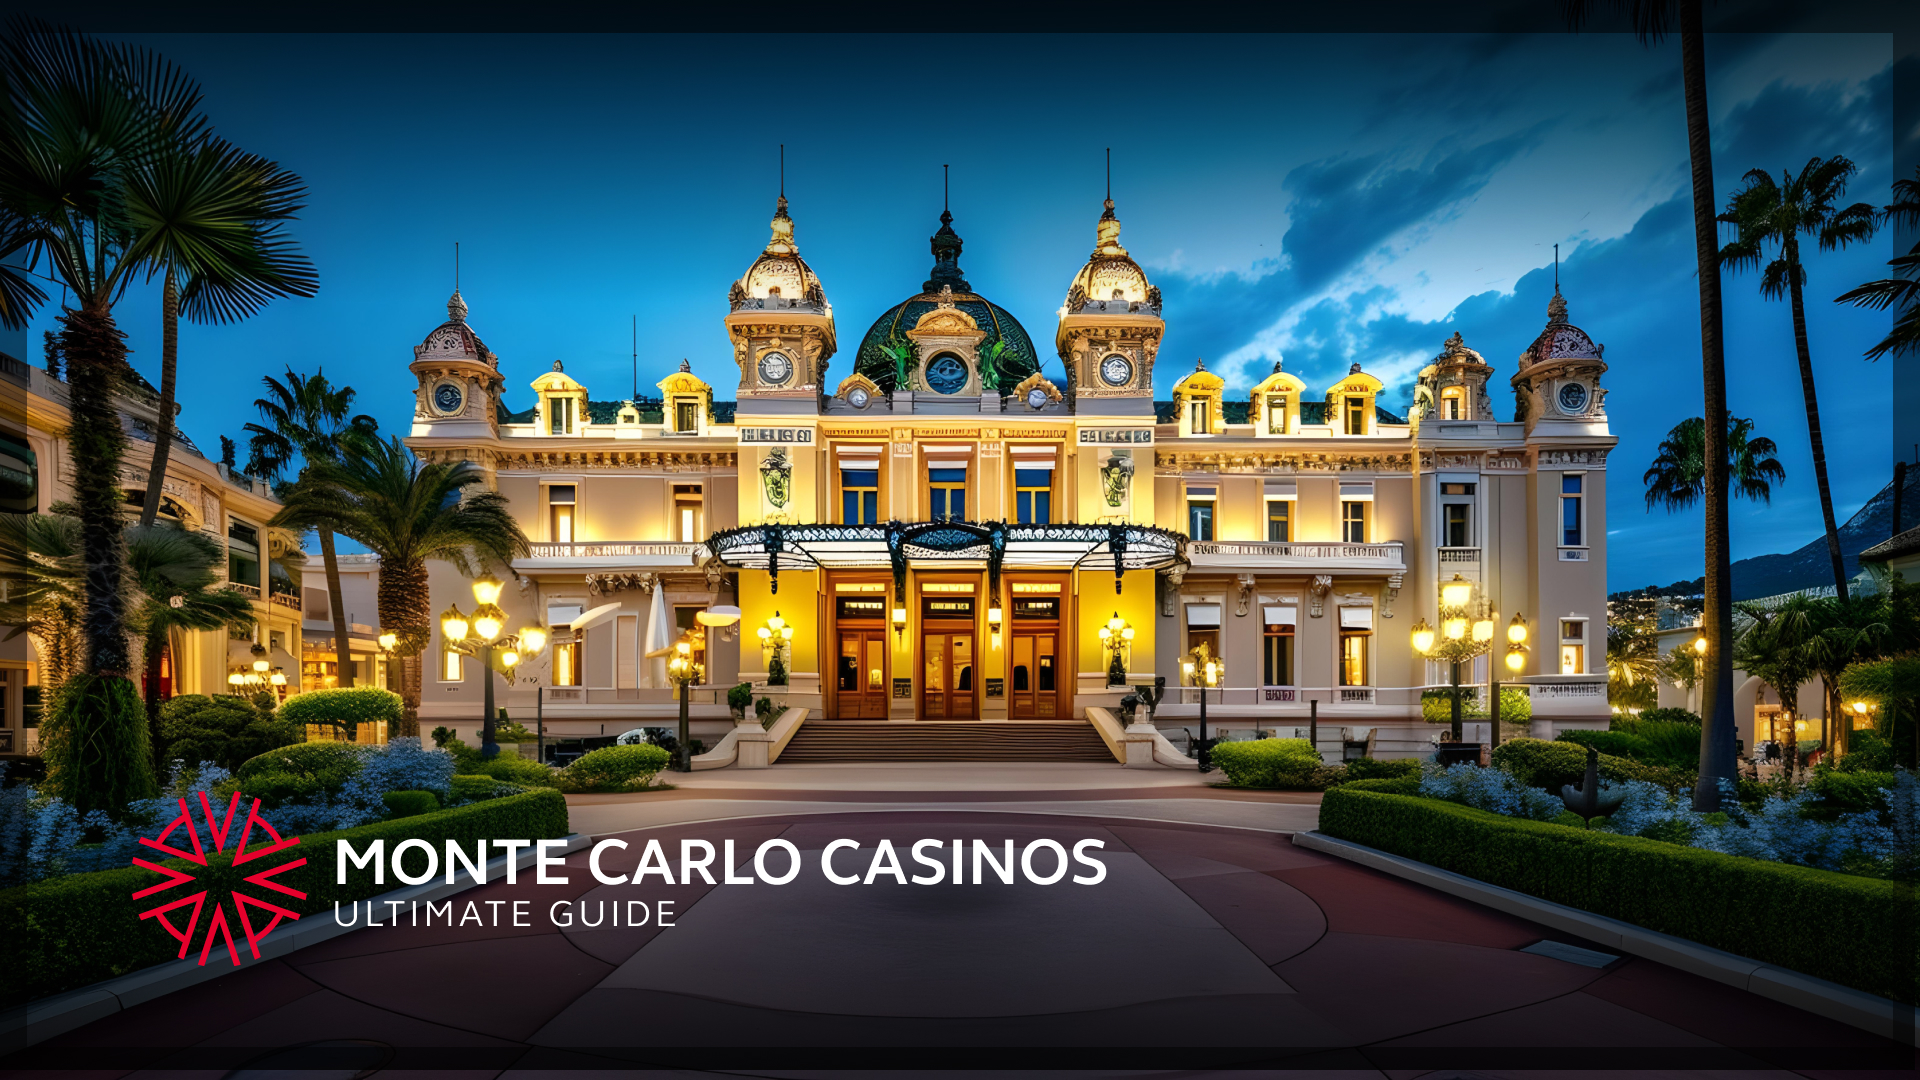 Image of one of the best casinos in Monaco studded with gold and imperial architecture